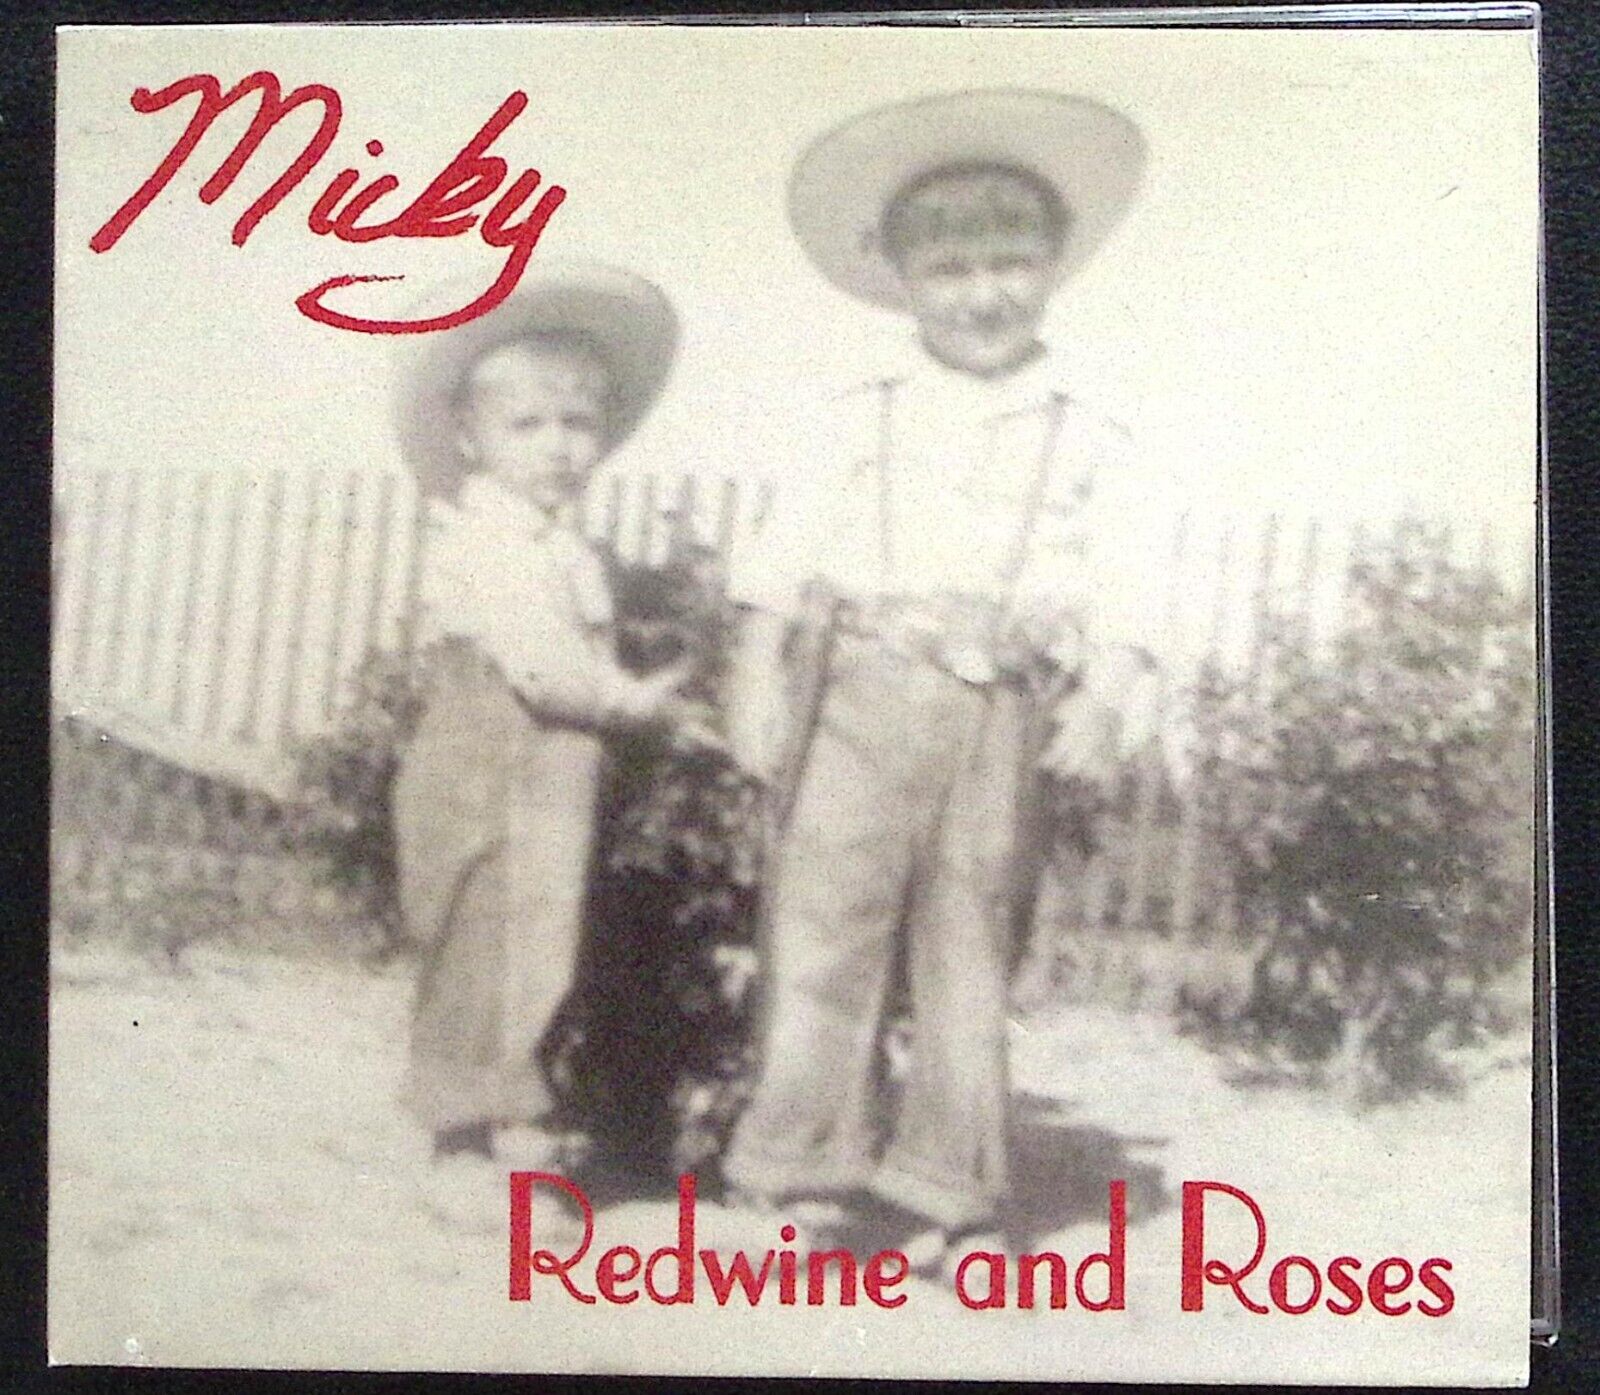 REDWINE AND ROSES  MICKY  RARE INDEPENDENT ALTERNATIVE ROCK  CD 1949